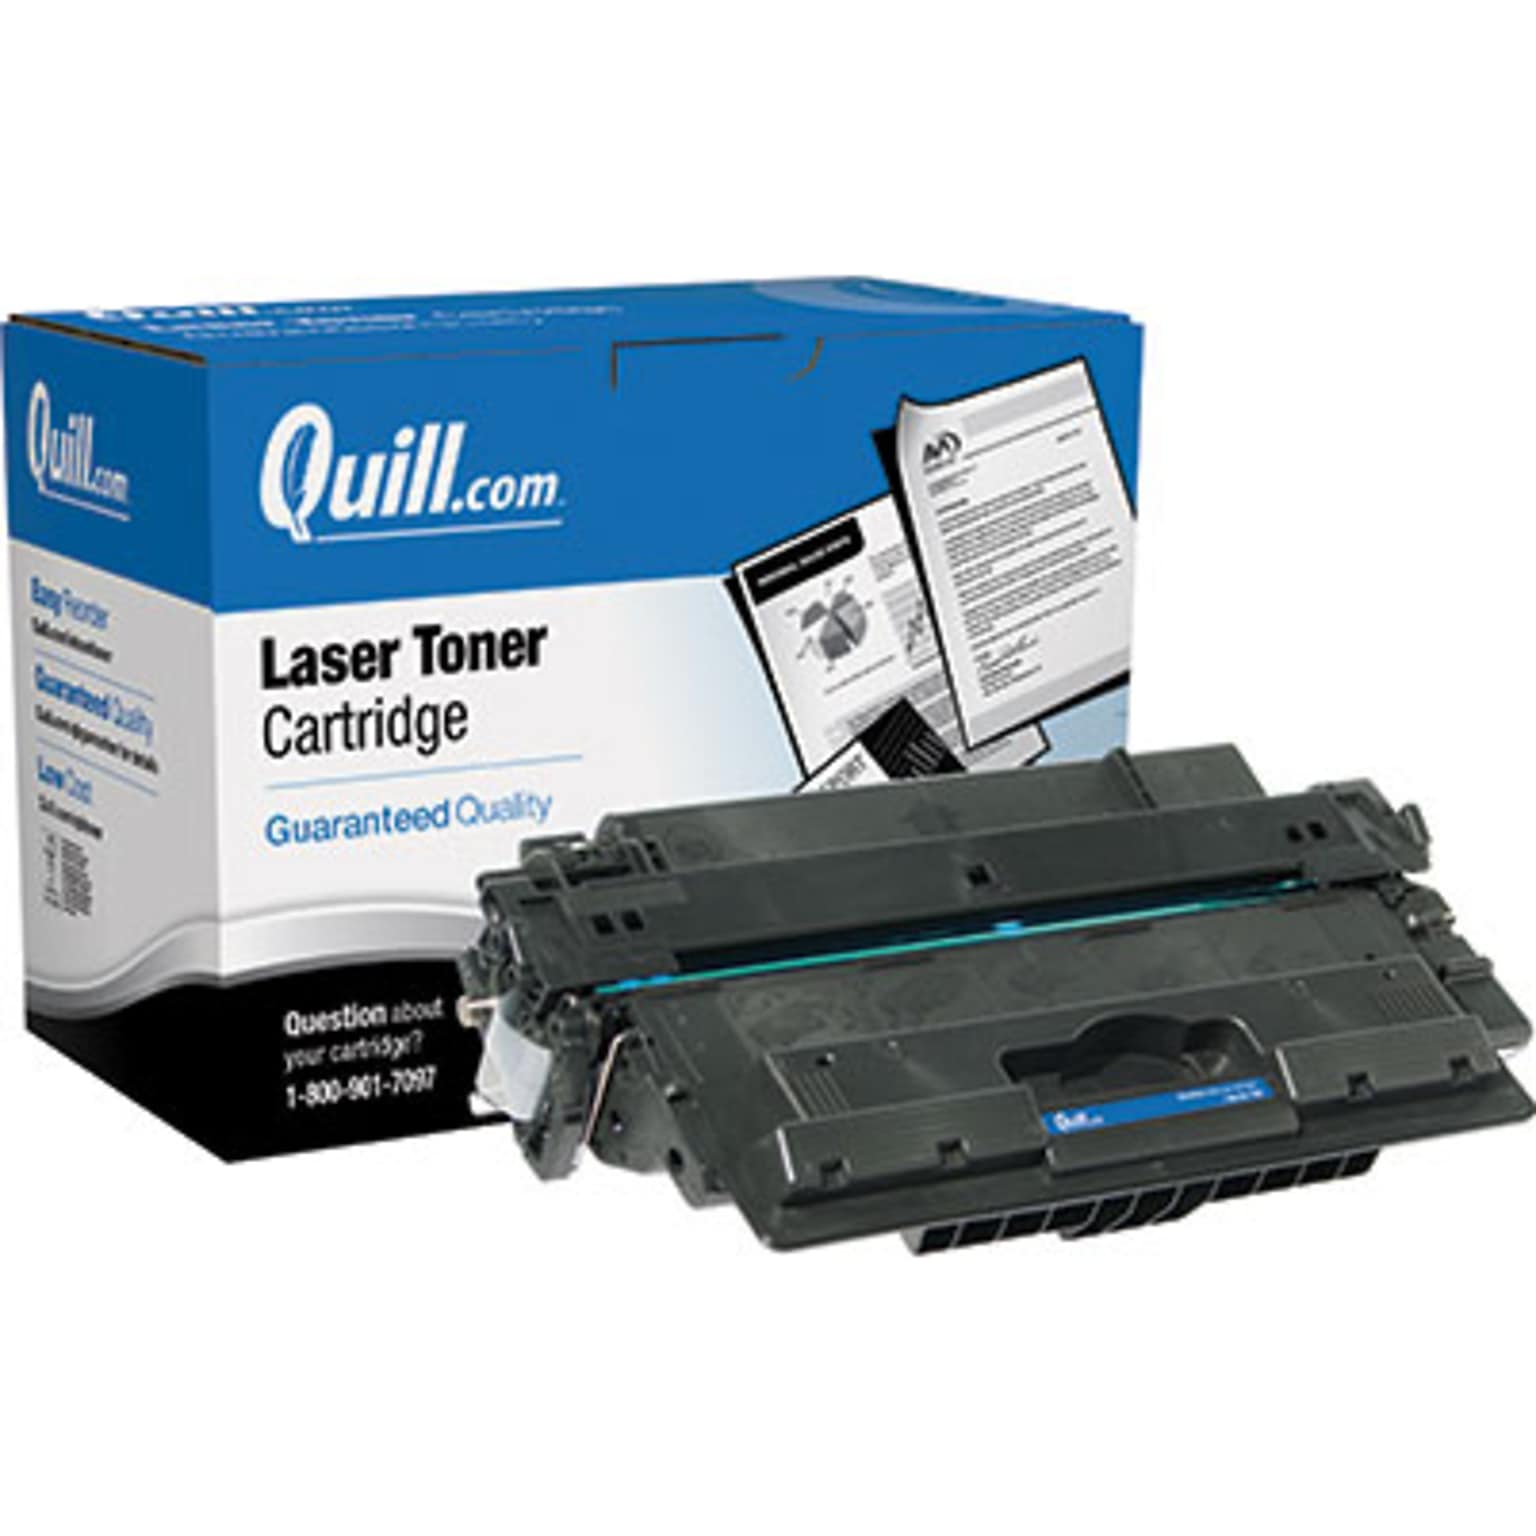 Quill Brand Remanufactured HP 70A (Q7570A) Black Laser Toner Cartridge (100% Satisfaction Guaranteed)